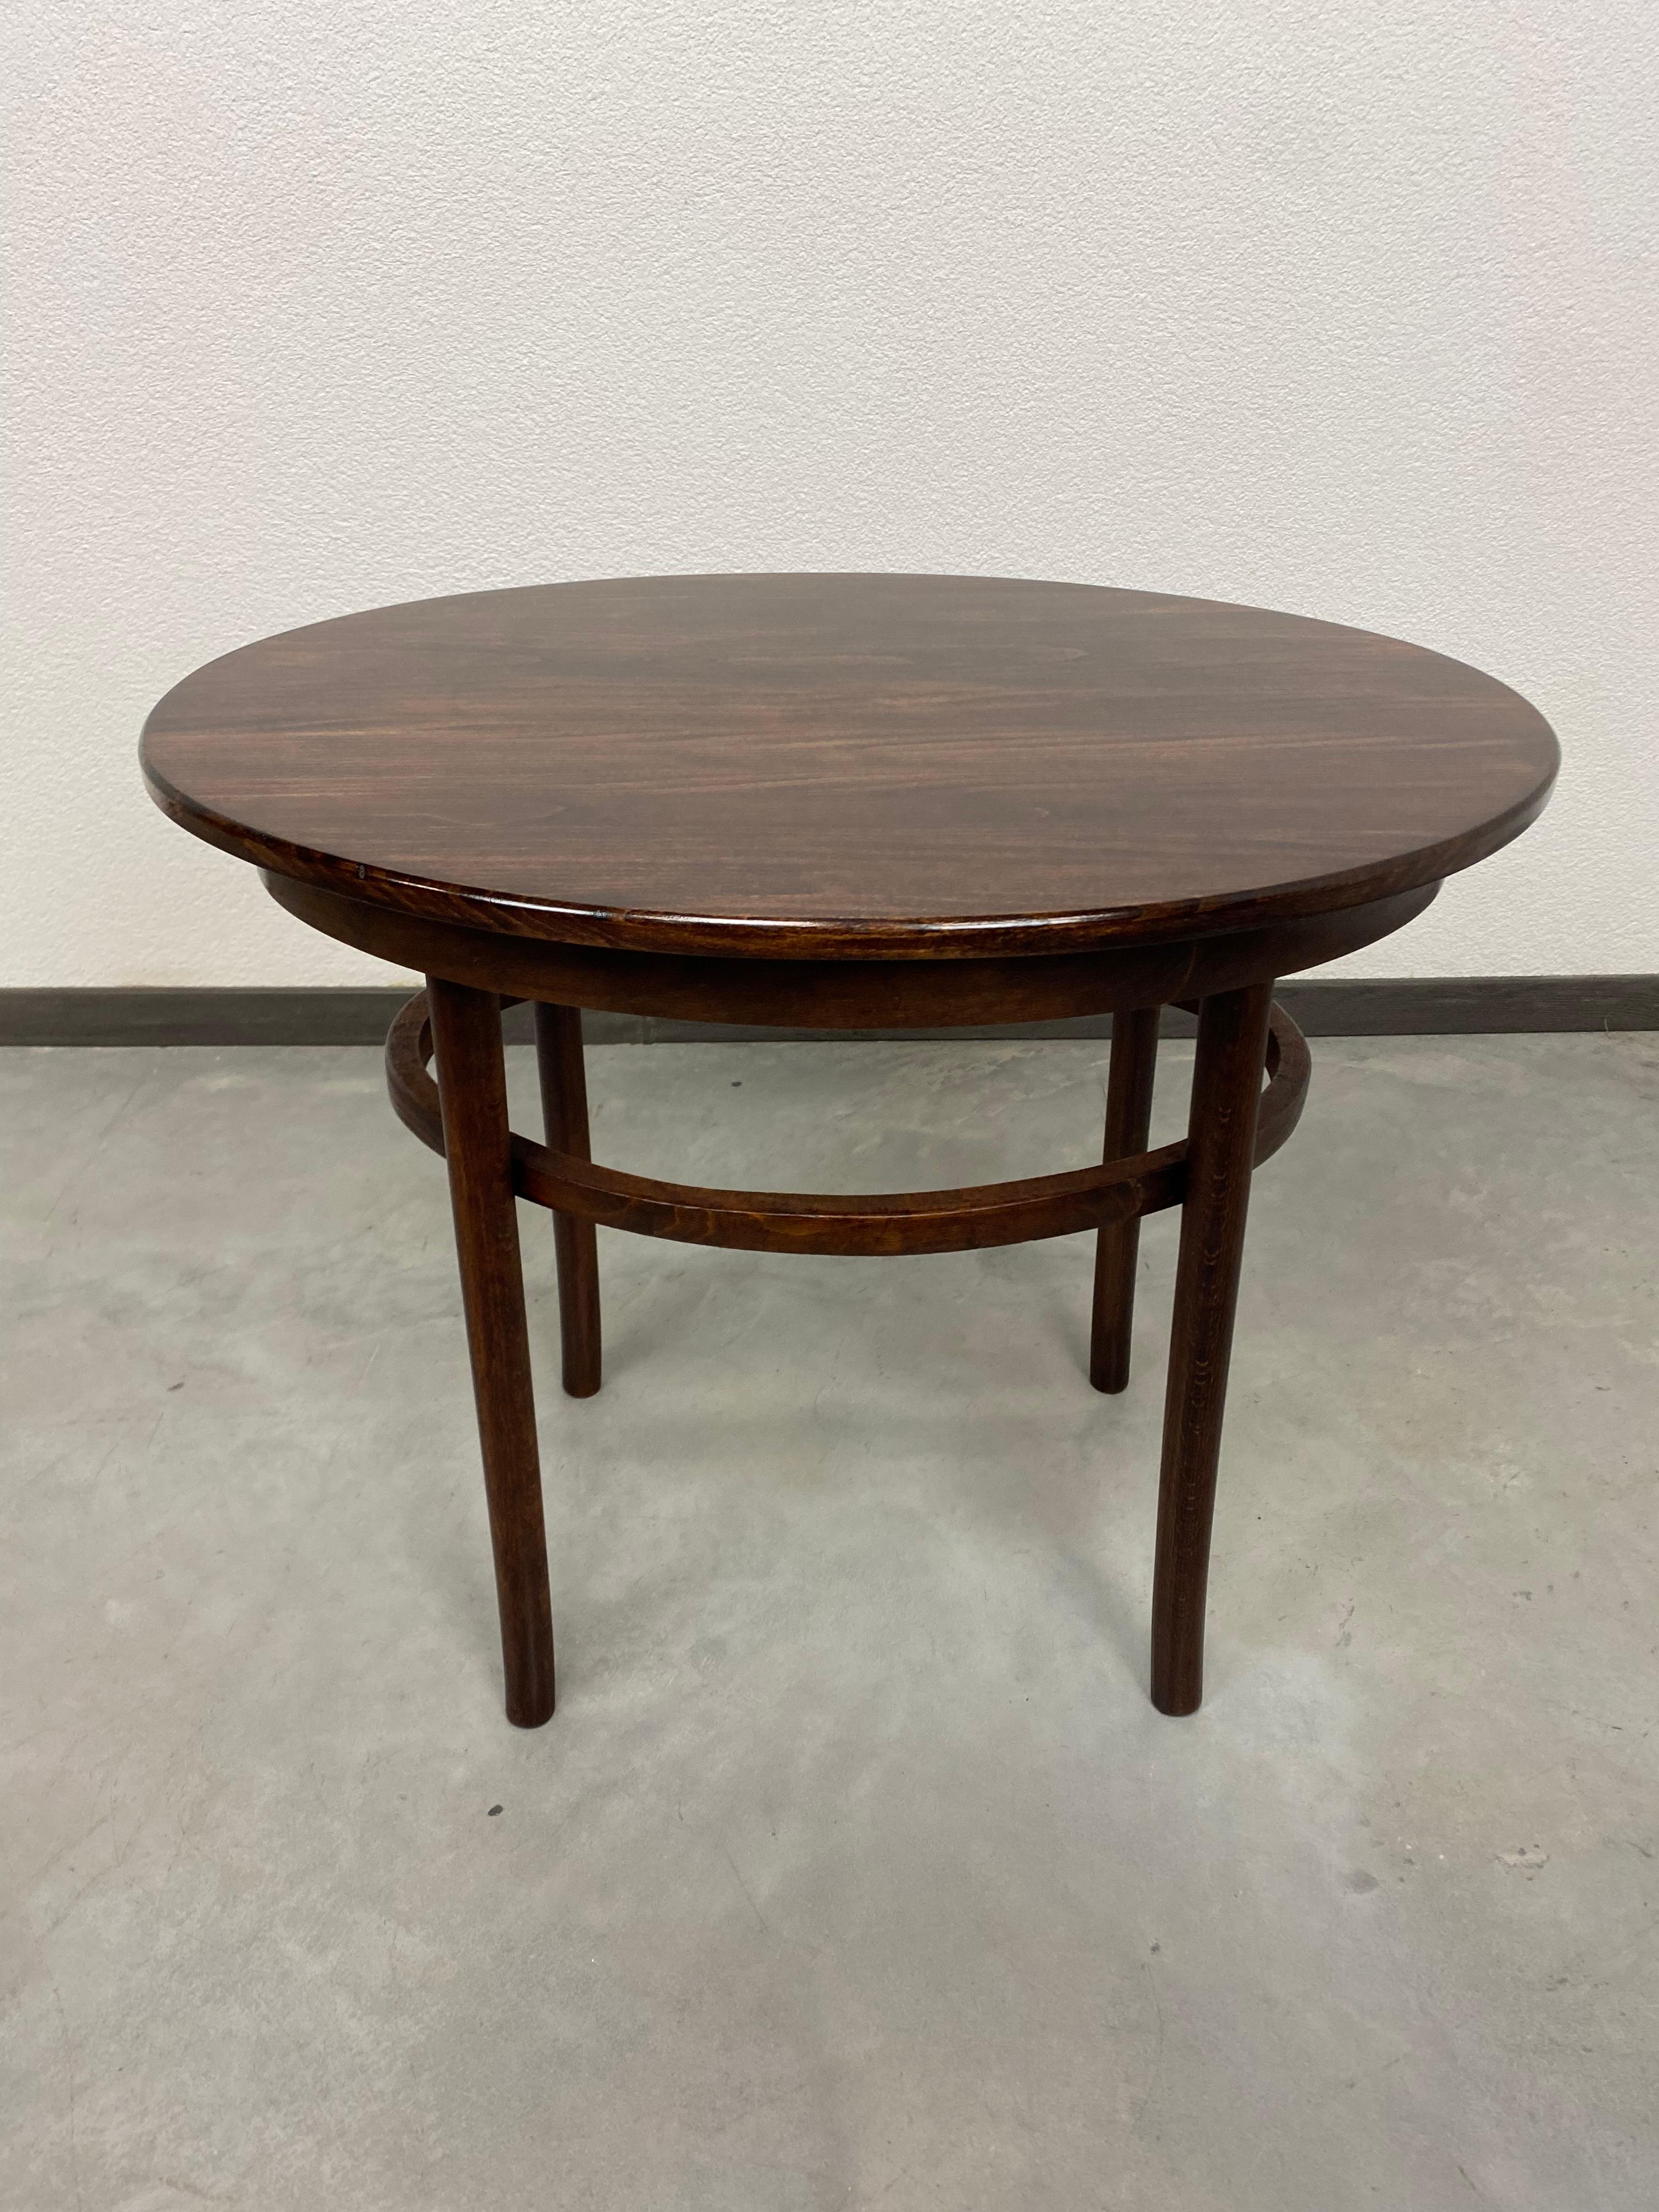 Low coffee table by Thonet Mundus professionally stained and repolished.